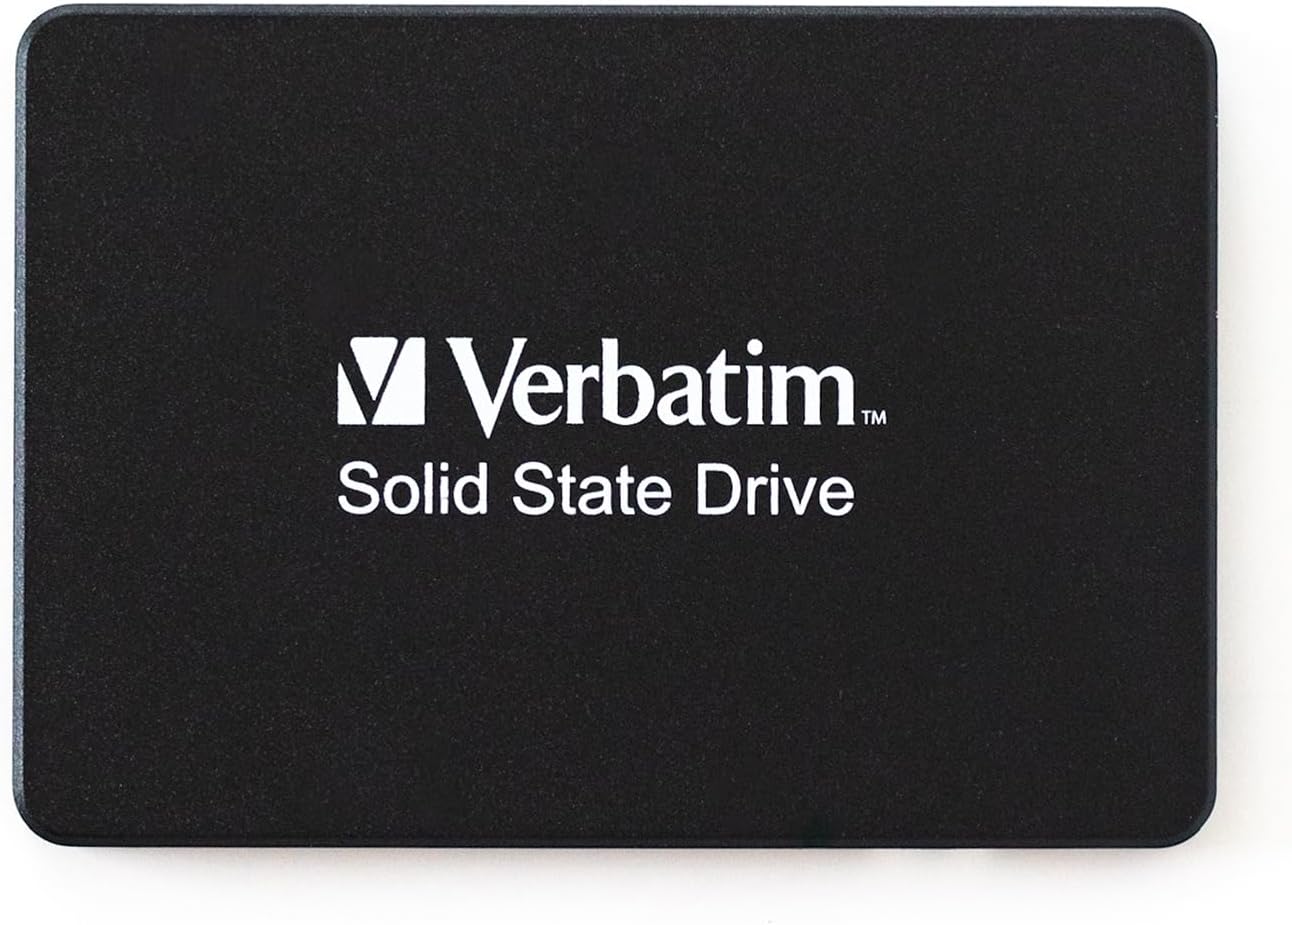 Verbatim 2TB Vi550 2.5 Internal Solid State Drive SSD SATA III Interface with 3D NAND Technology